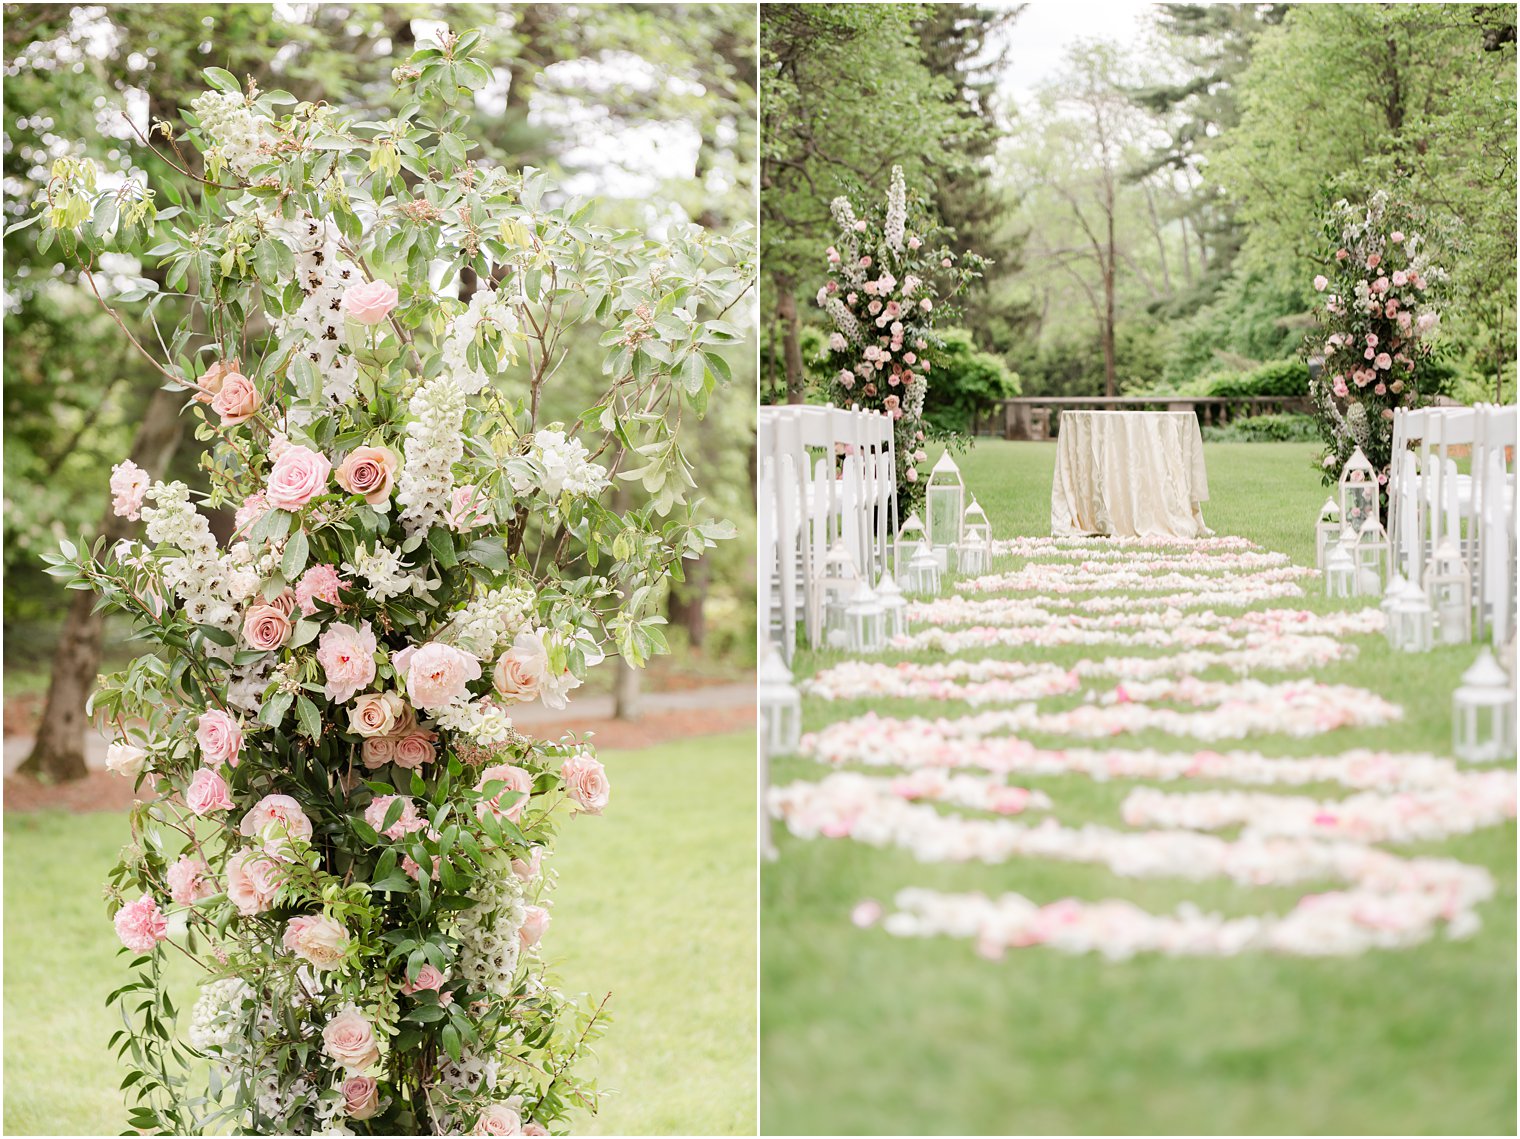 Wedding ceremony at Skylands Manor with florals by Twisted Willow Flowers